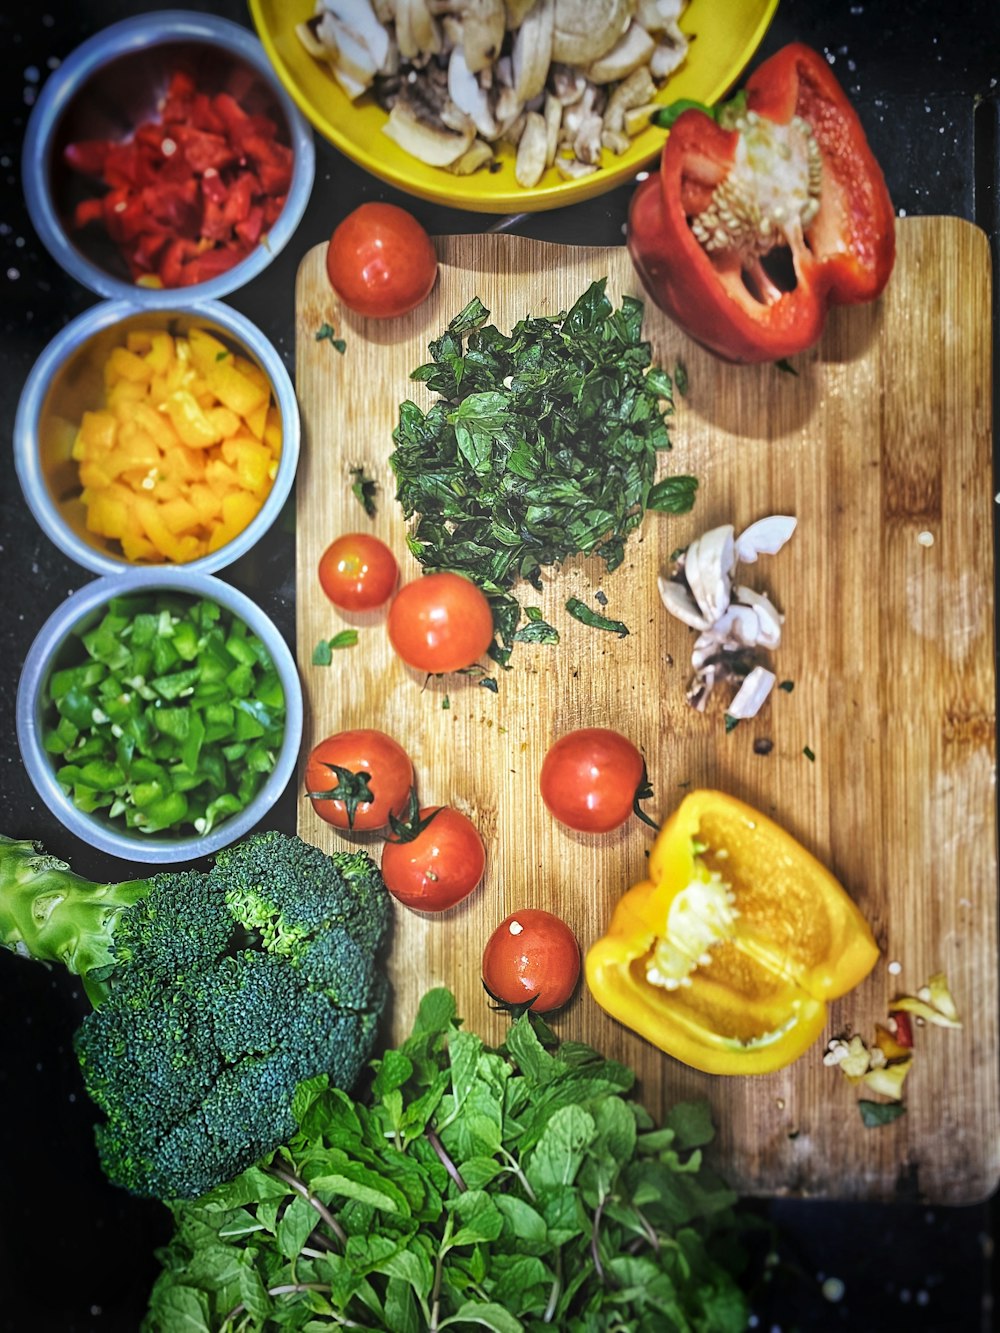 orange tomatoes near sliced yellow bell pepper, broccoli on wooden chopping board